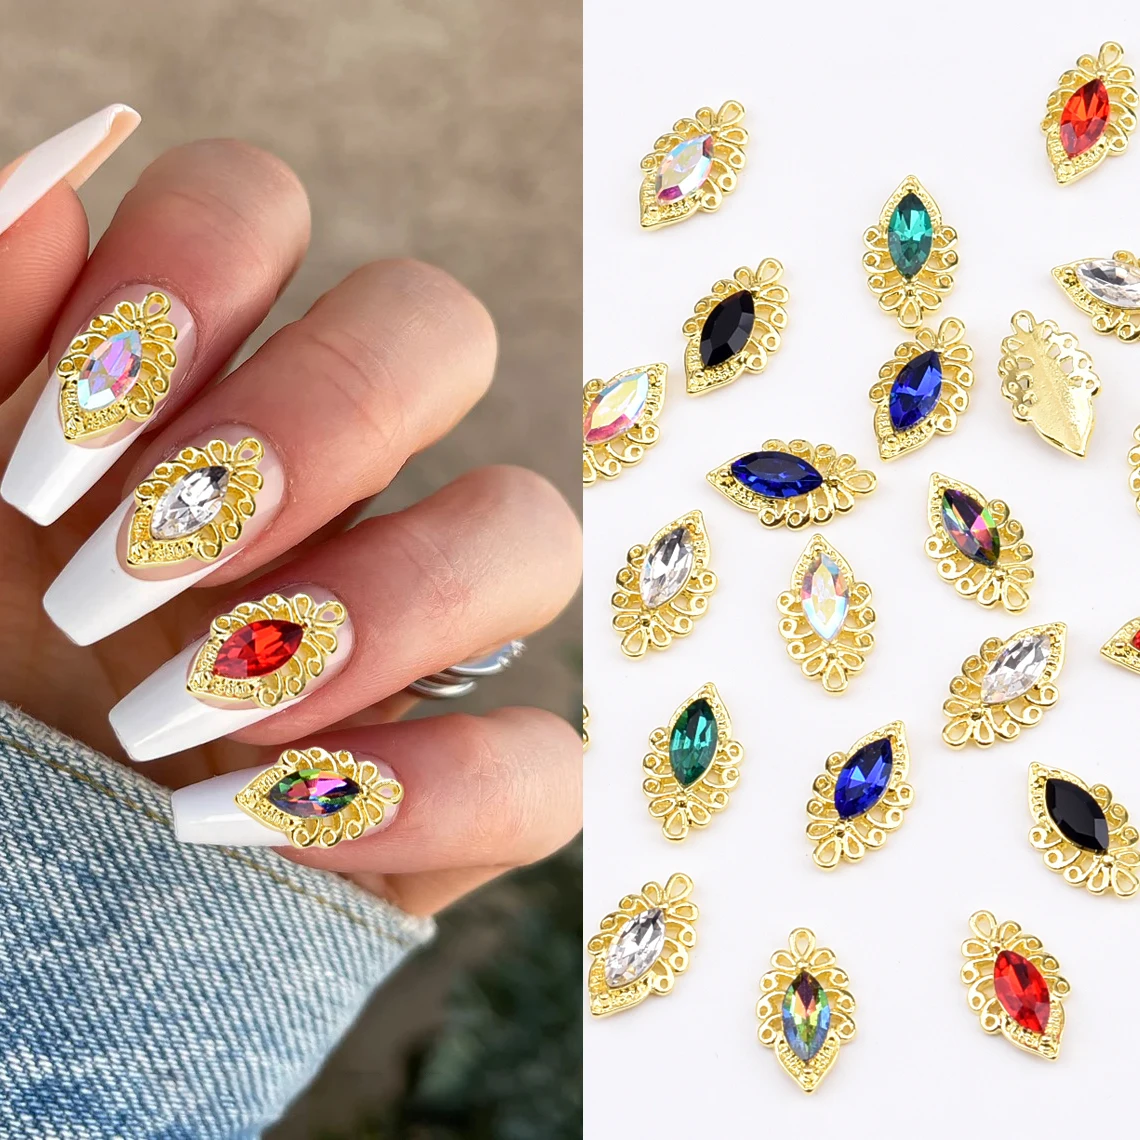 10pcs Luxury Gold Alloy 3d Nail Charms Design Shine Gem Stone Nail Art Decoration Jewels Accessories Supplies for Women Girl